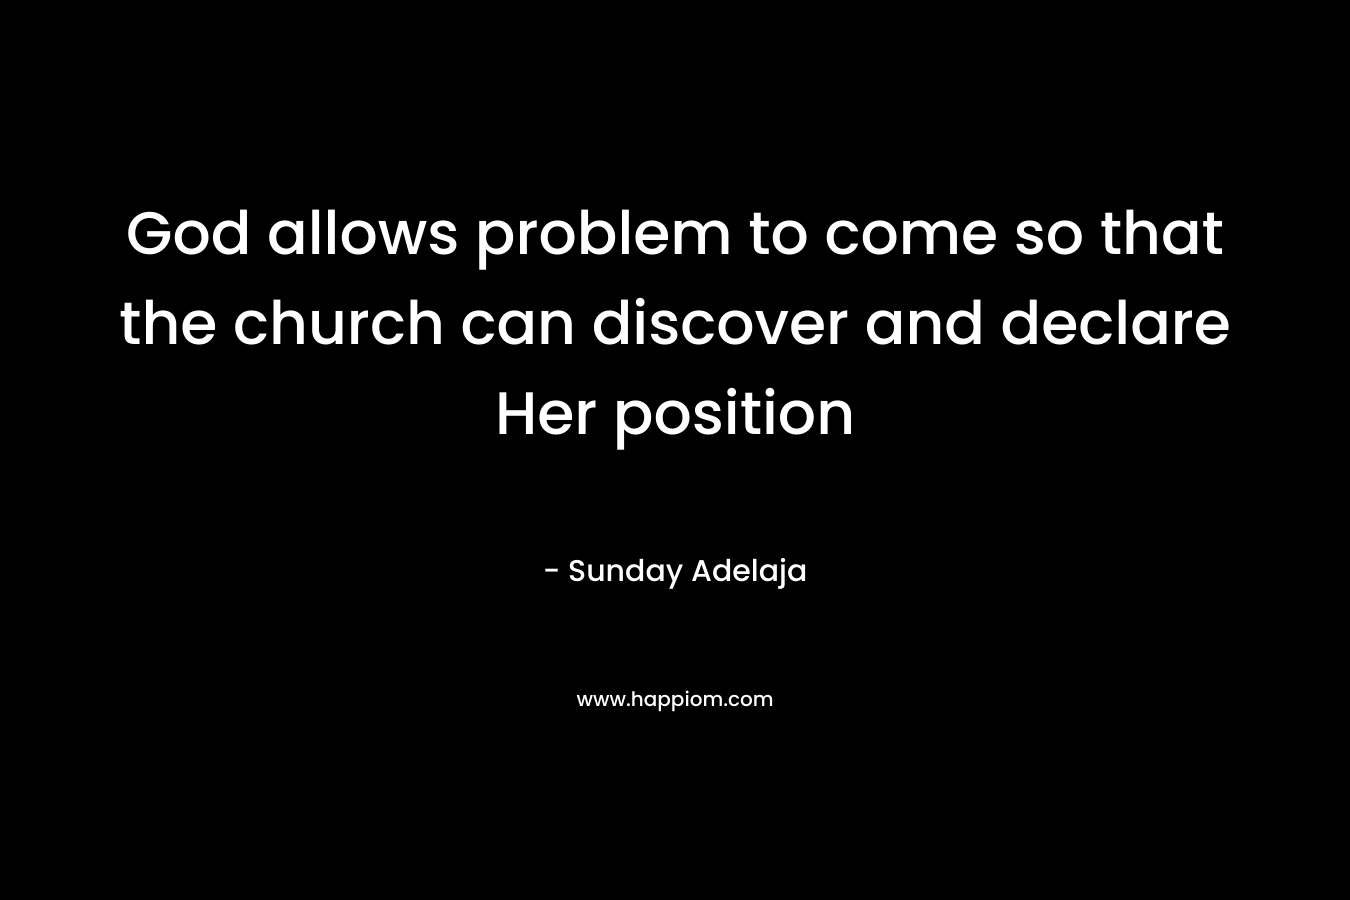 God allows problem to come so that the church can discover and declare Her position